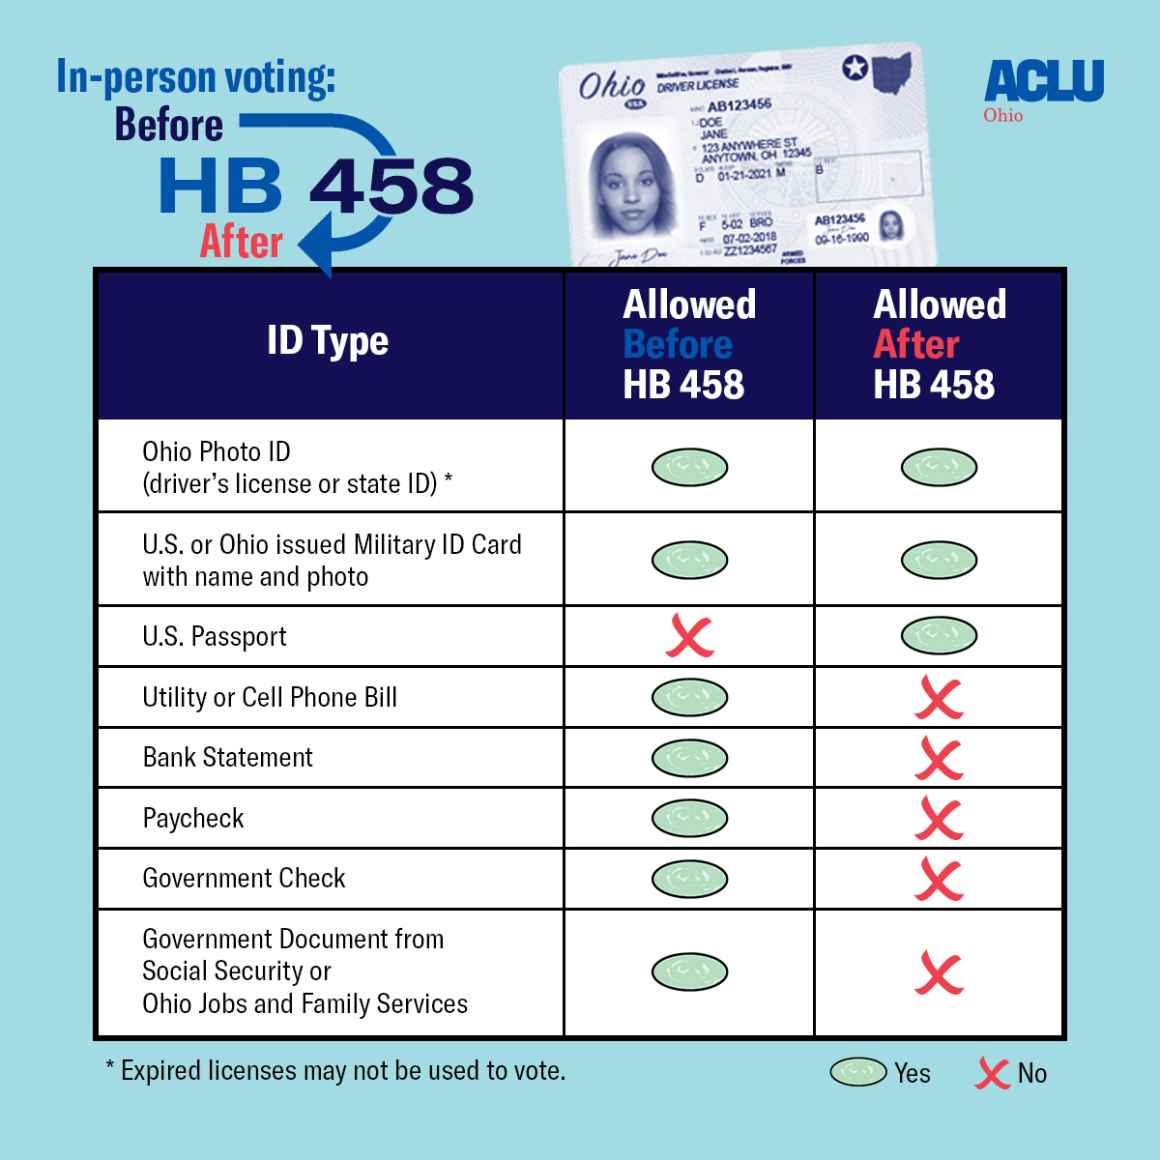 A side-by-side chart comparing Ohio's voter ID laws before and after the passage of HB 458